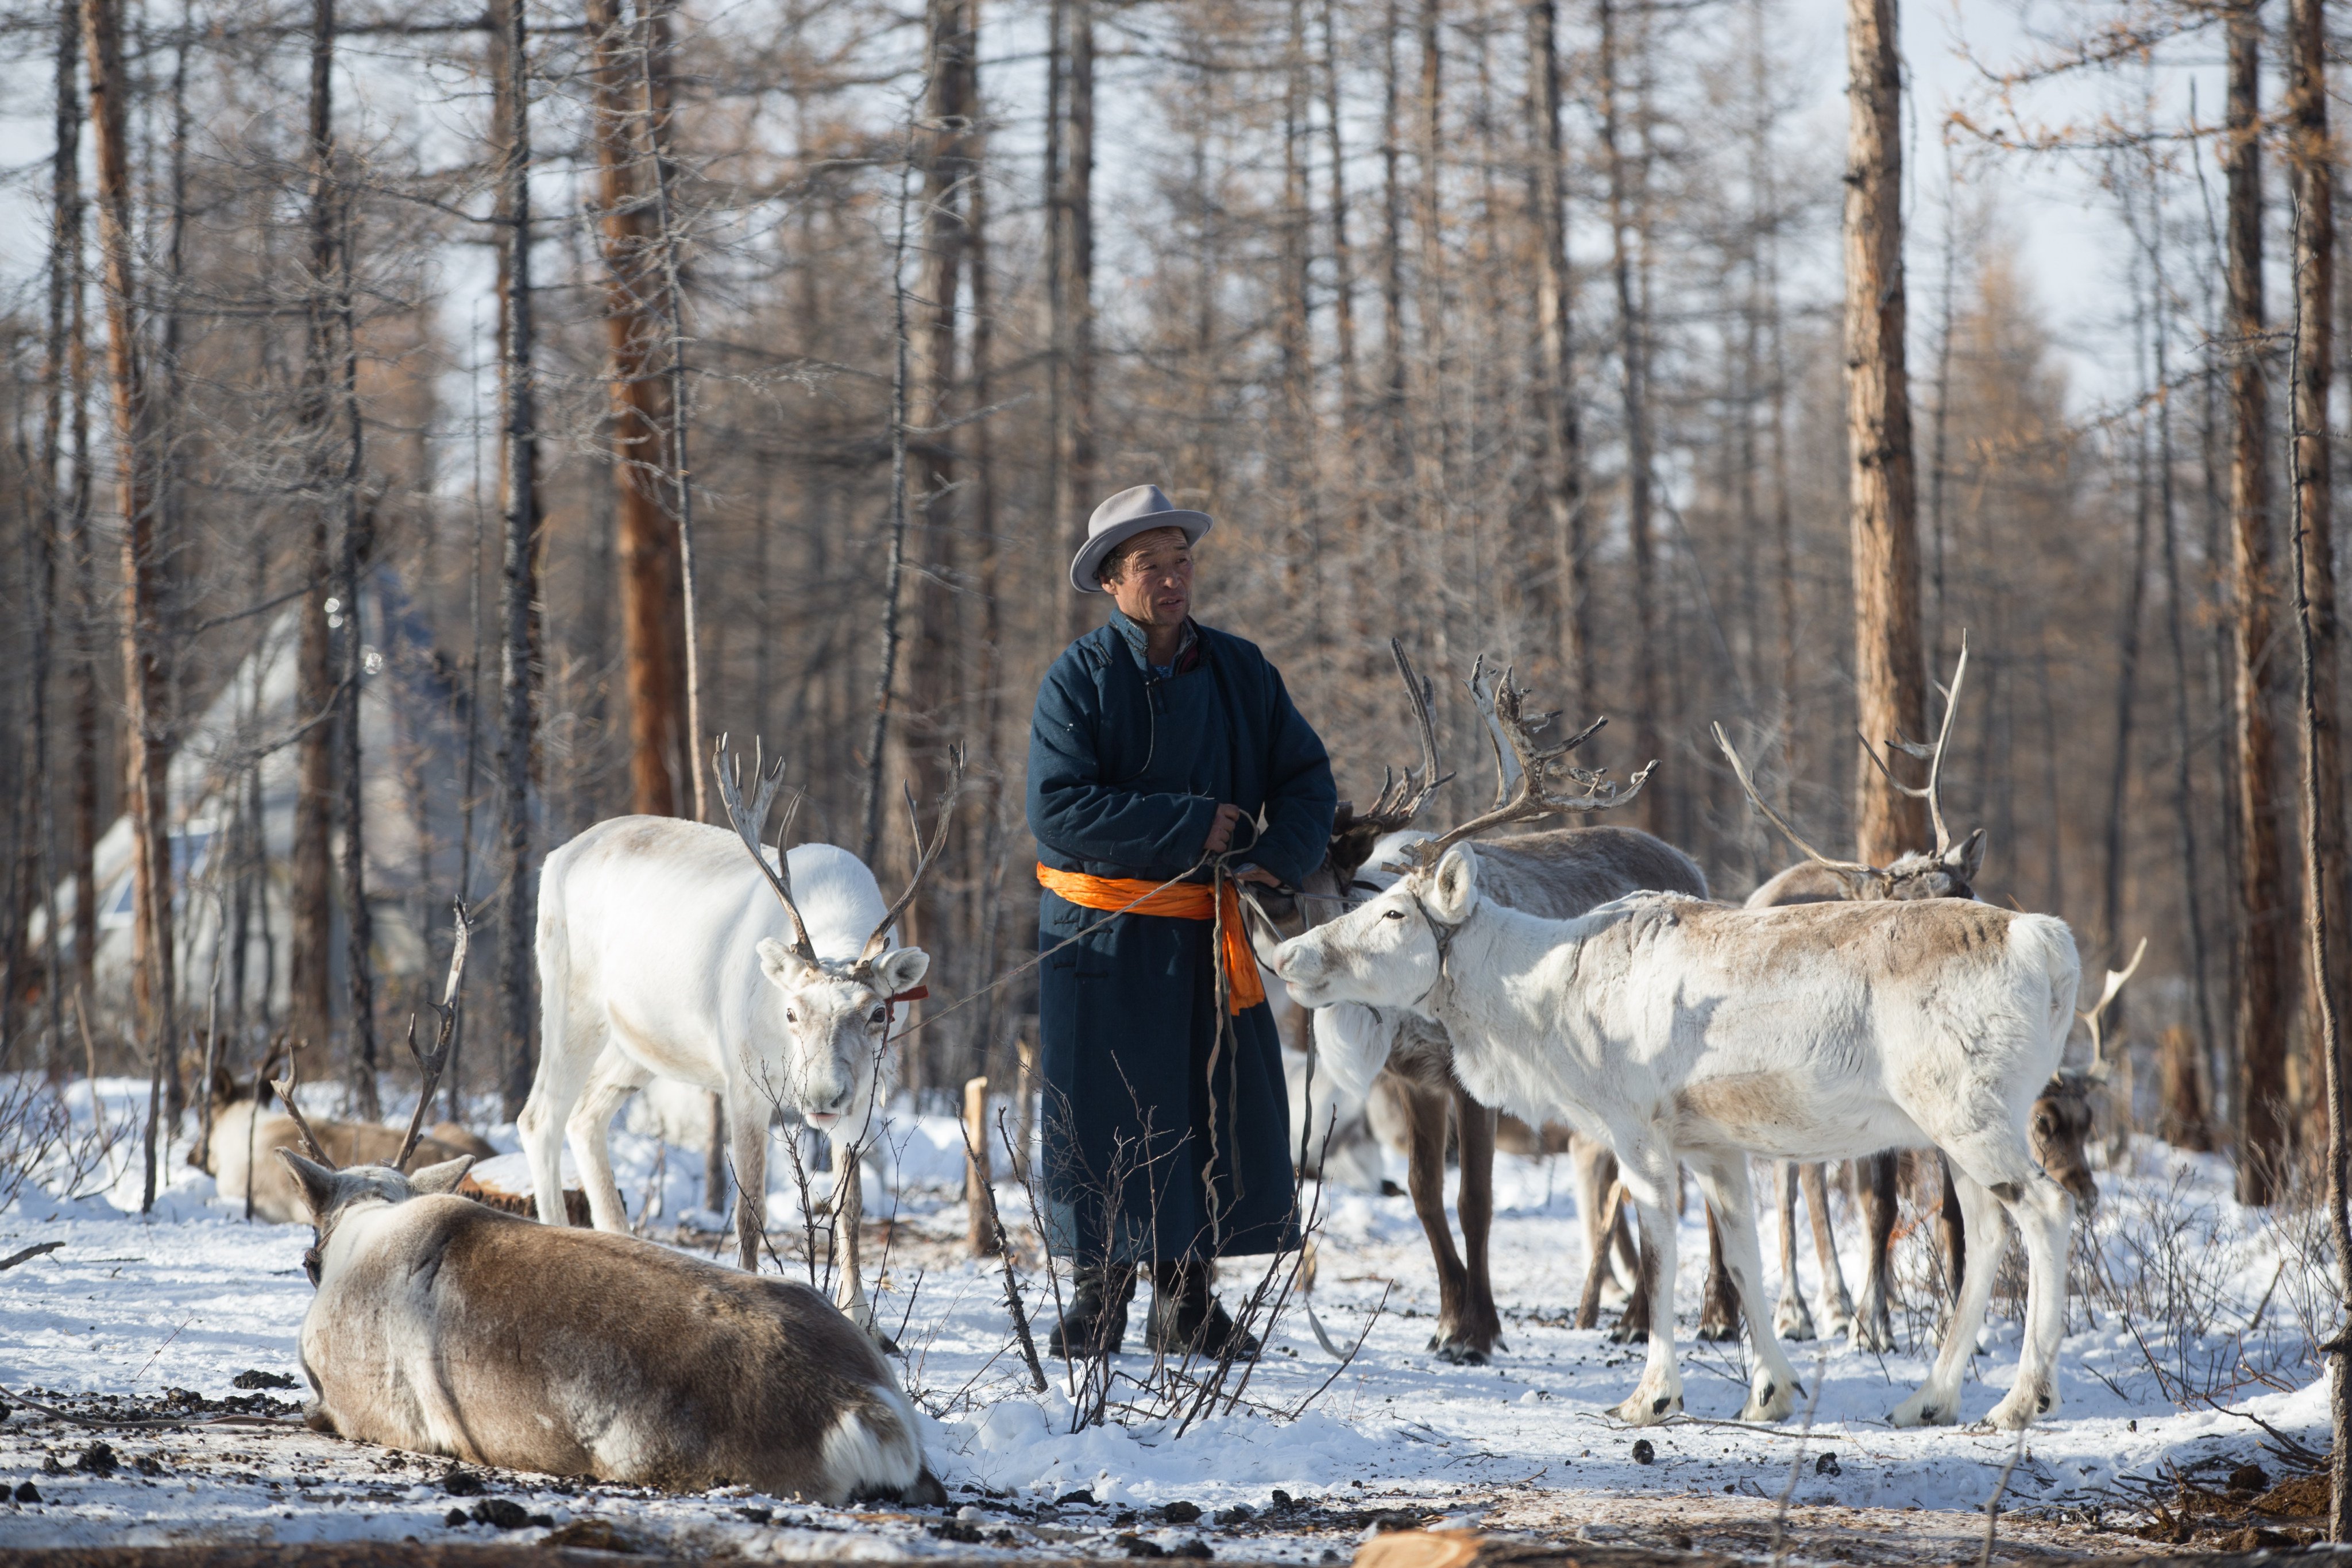 A Dukha herder tends his reindeer in the forest of northern Mongolia. Nomadic herders in Mongolia have suffered as their livelihoods are hit by climate change and development projects that damage the environment, but avenues for redress are often limited. Photo: Byamba Ochir